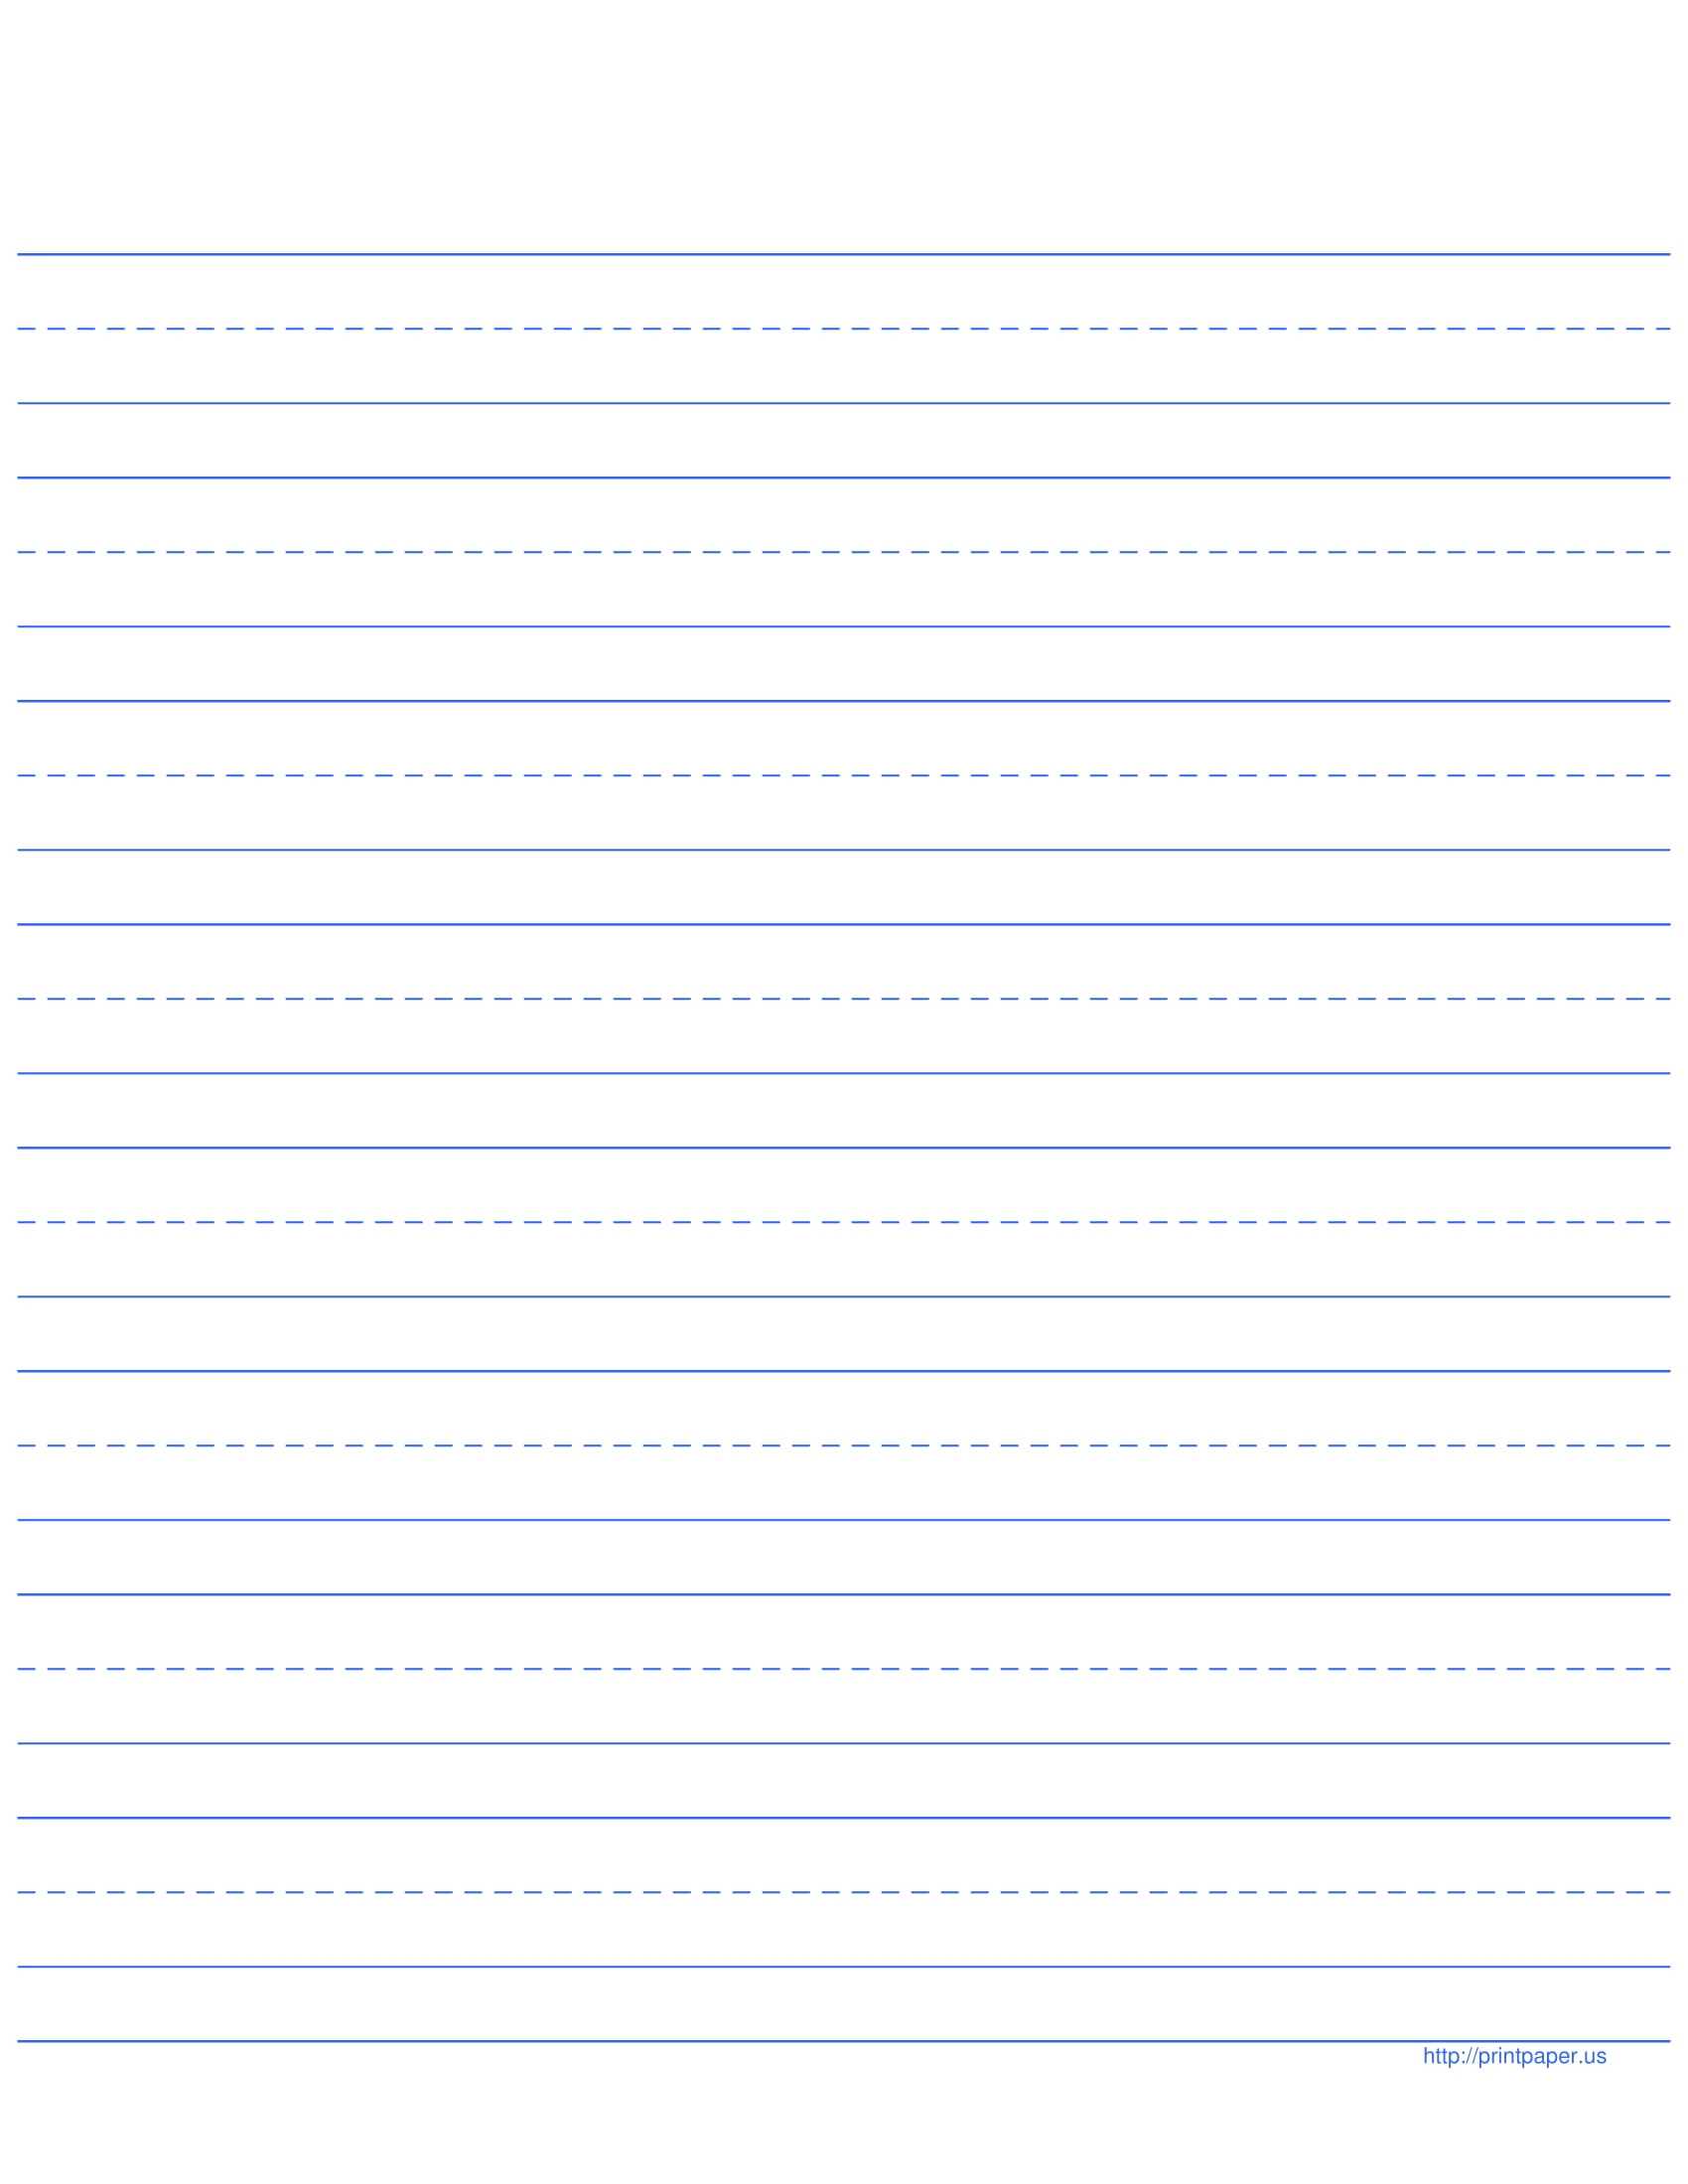 11+ Lined Paper Templates – Pdf | Free & Premium Templates Regarding Ruled Paper Word Template